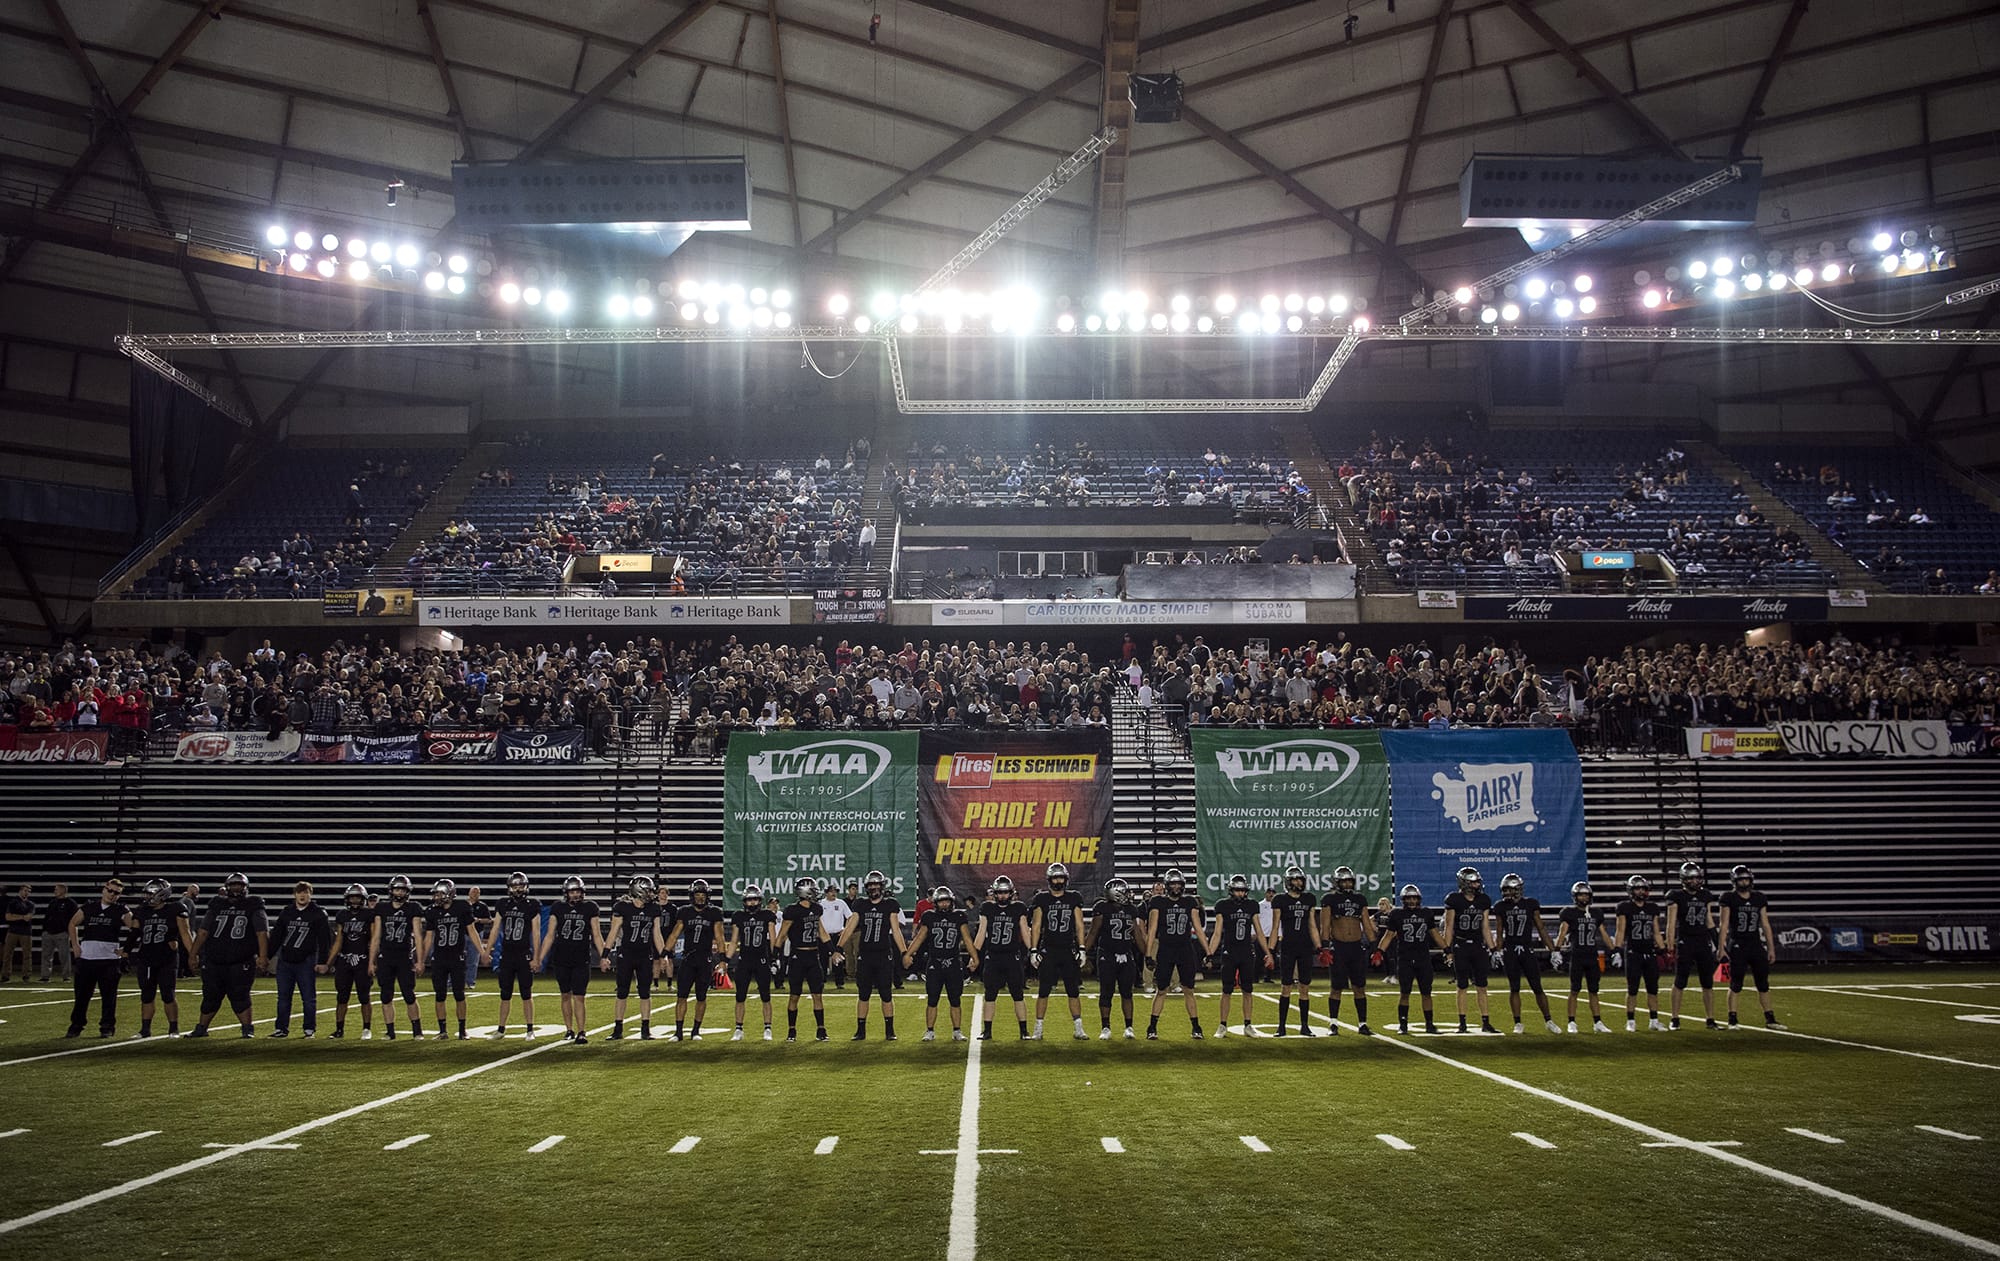 Union lines up before the Class 4A state football championship game against Lake Stevens on Saturday, Dec. 1, 2018, in Tacoma, Wash.